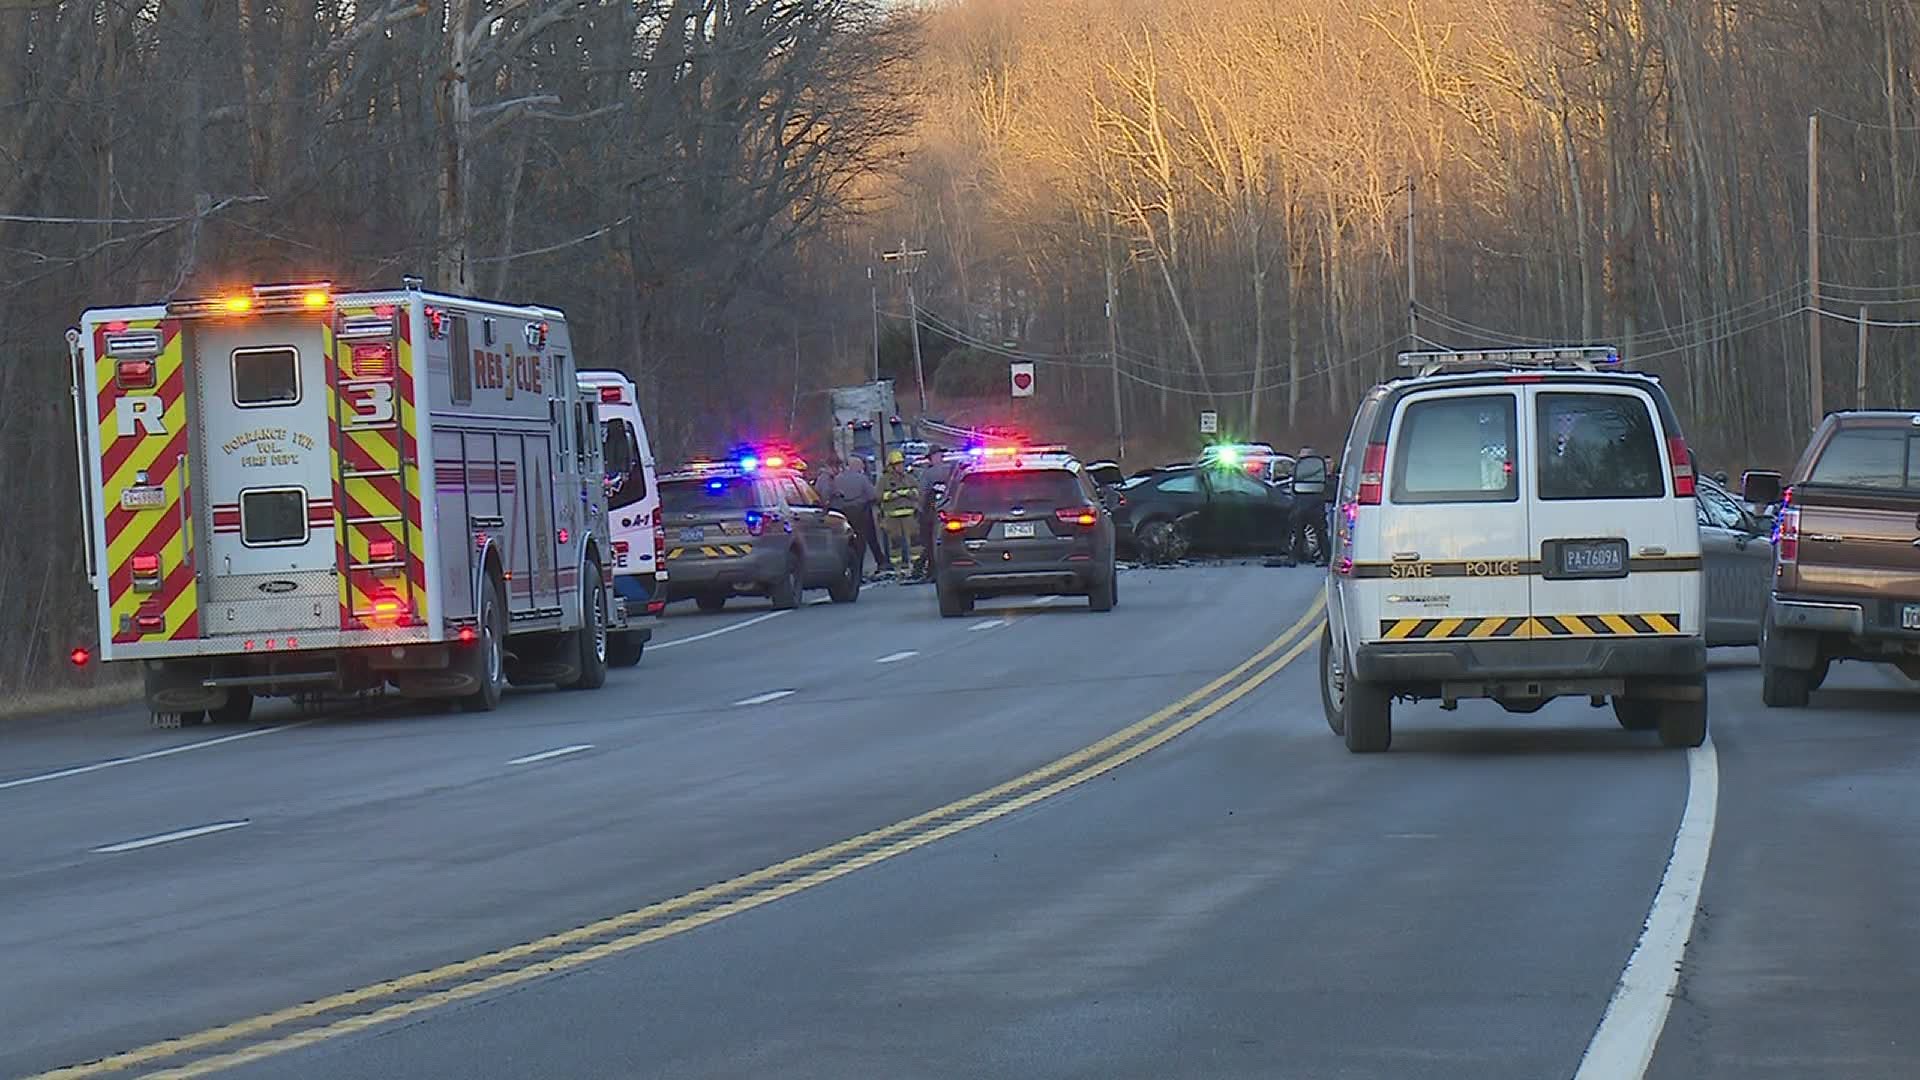 The deadly crash happened Monday afternoon in Luzerne County